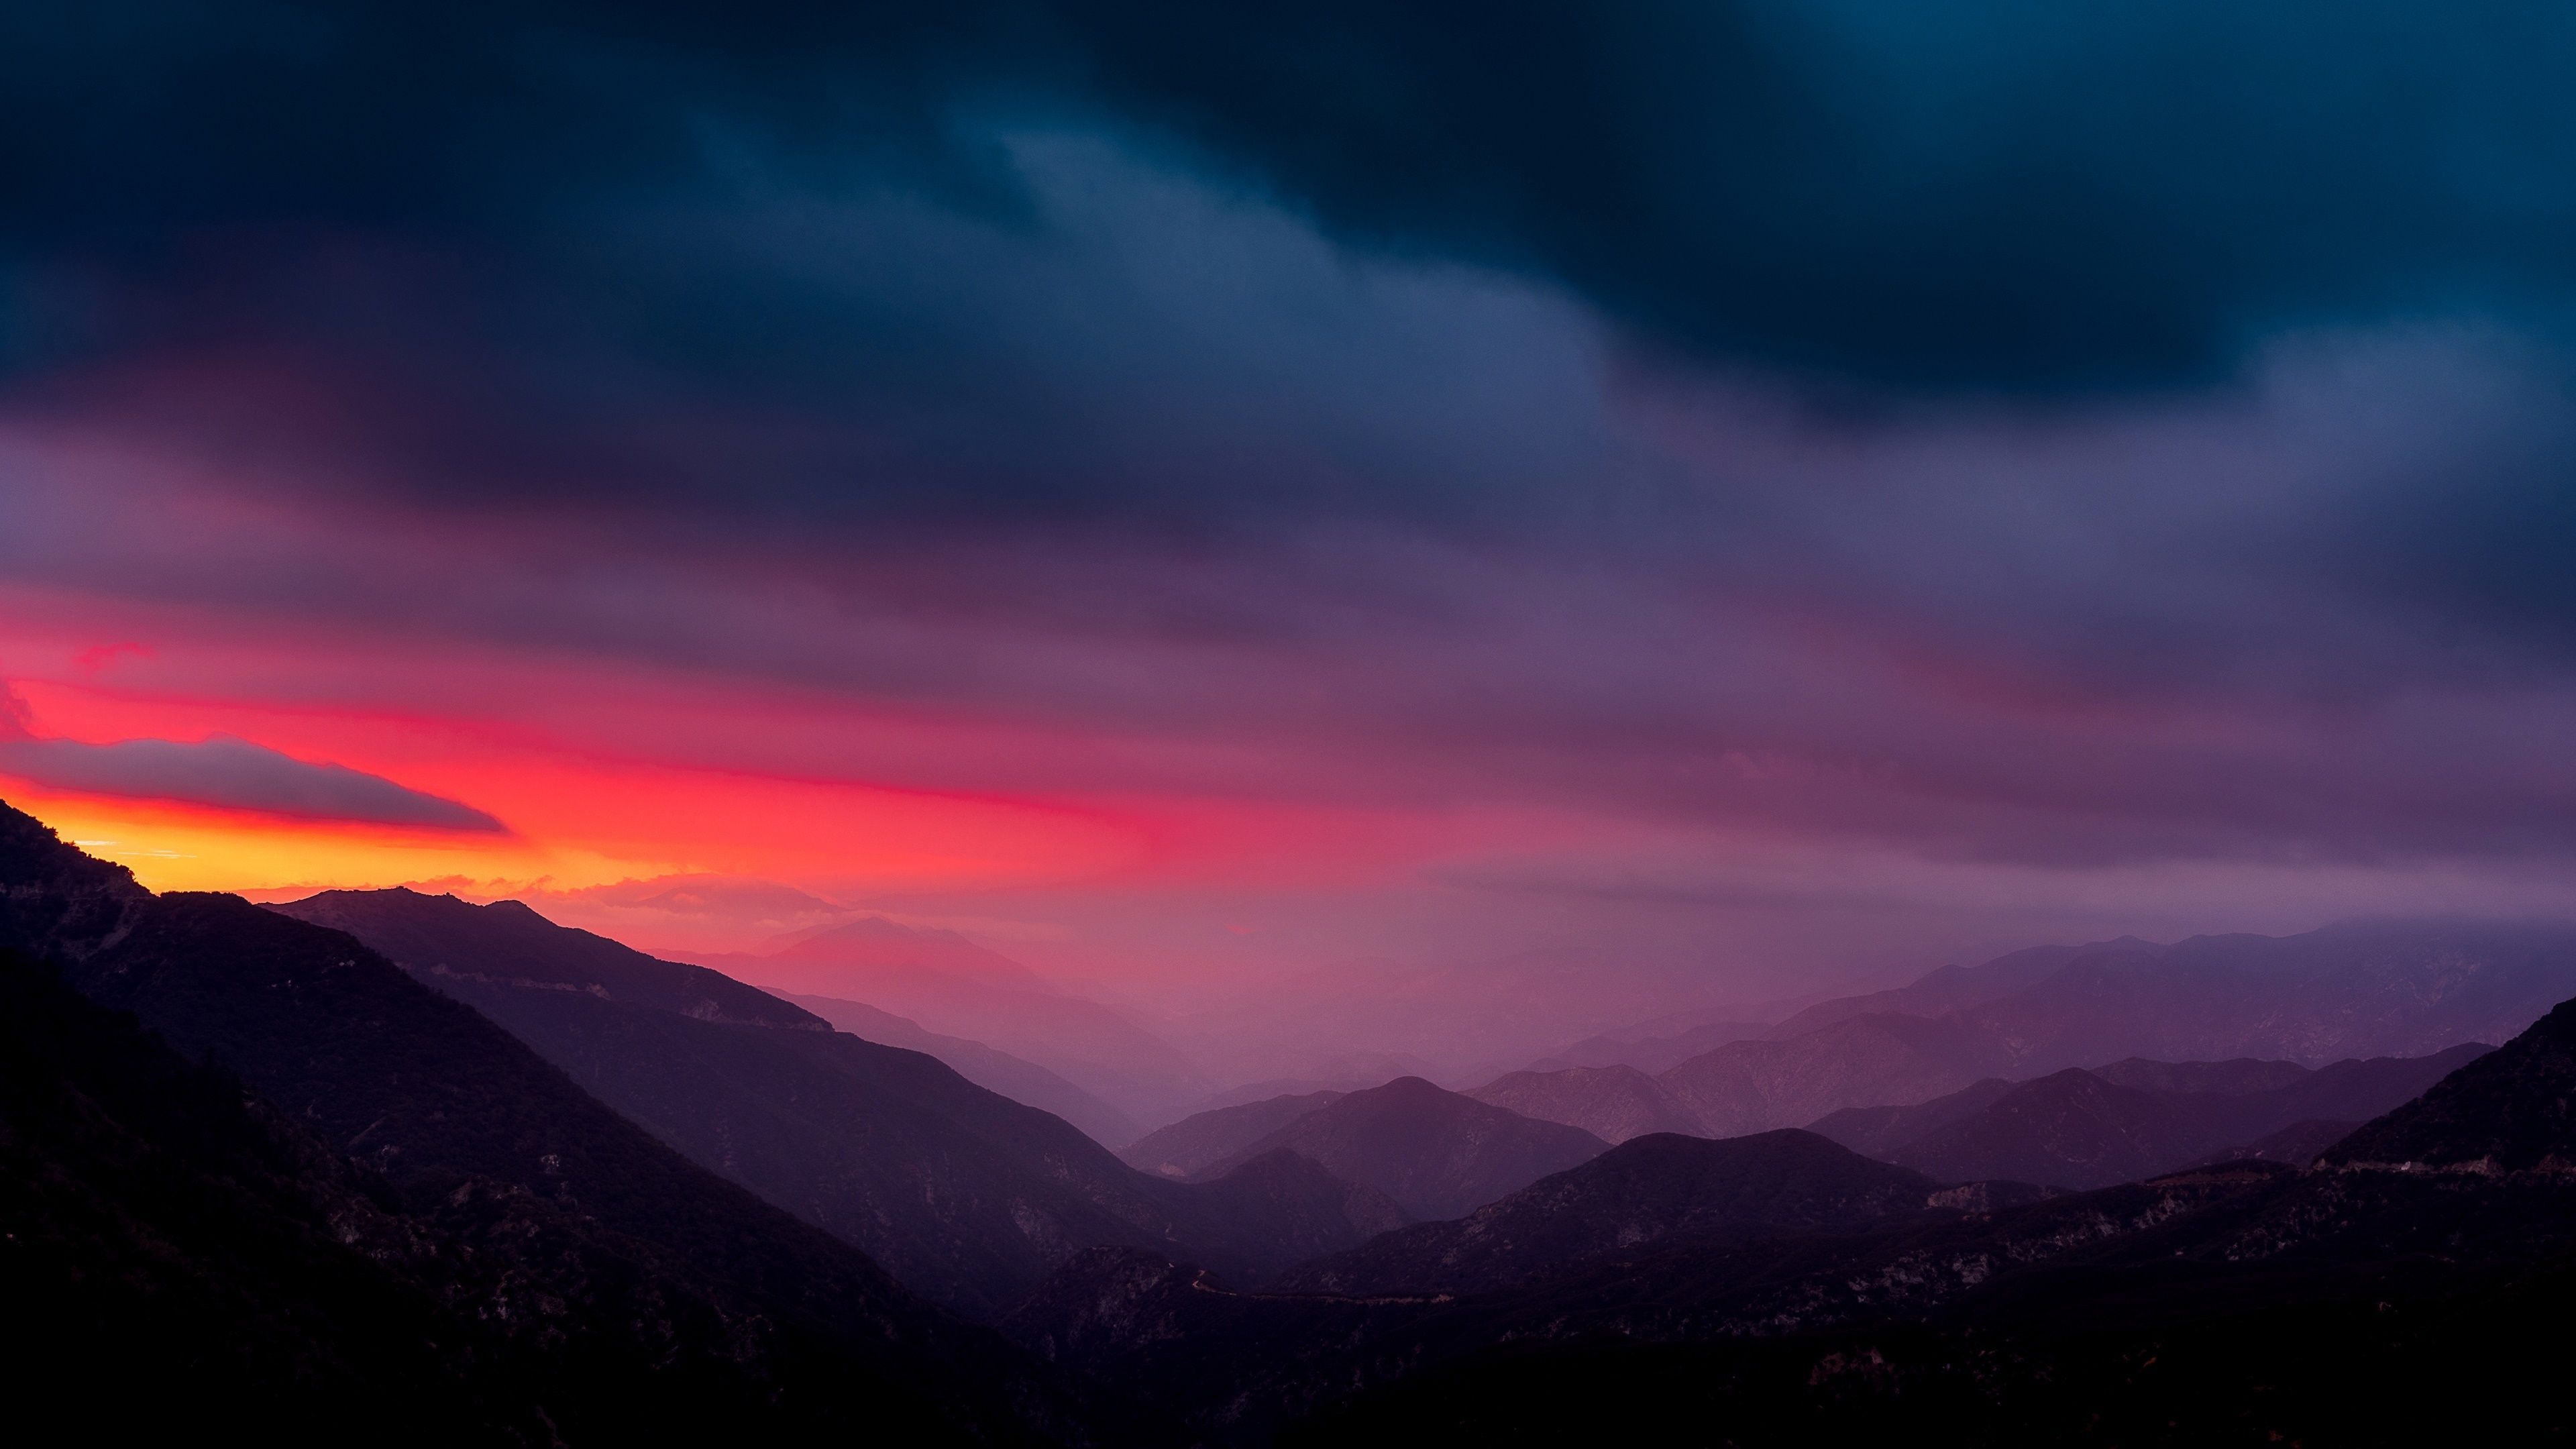 24+ Recommendations Of Sunset Mountain Wallpaper 4k Download For Free ...